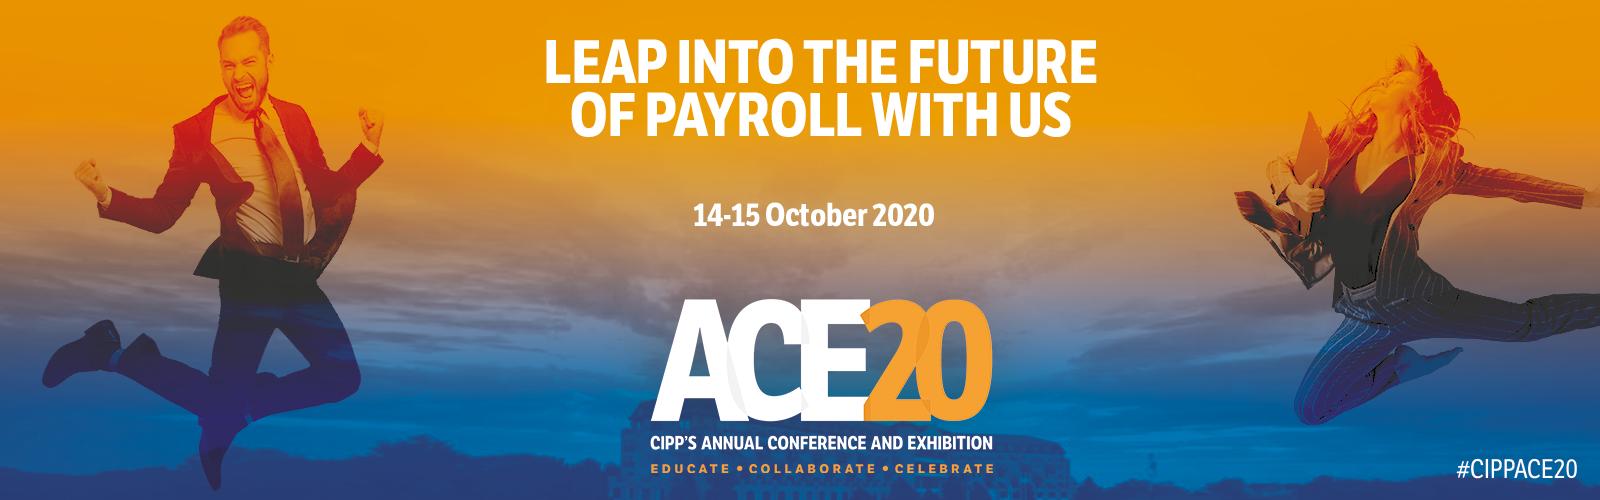 CIPP Annual Conference & Exhibition. Payroll, pensions and reward. CIPP